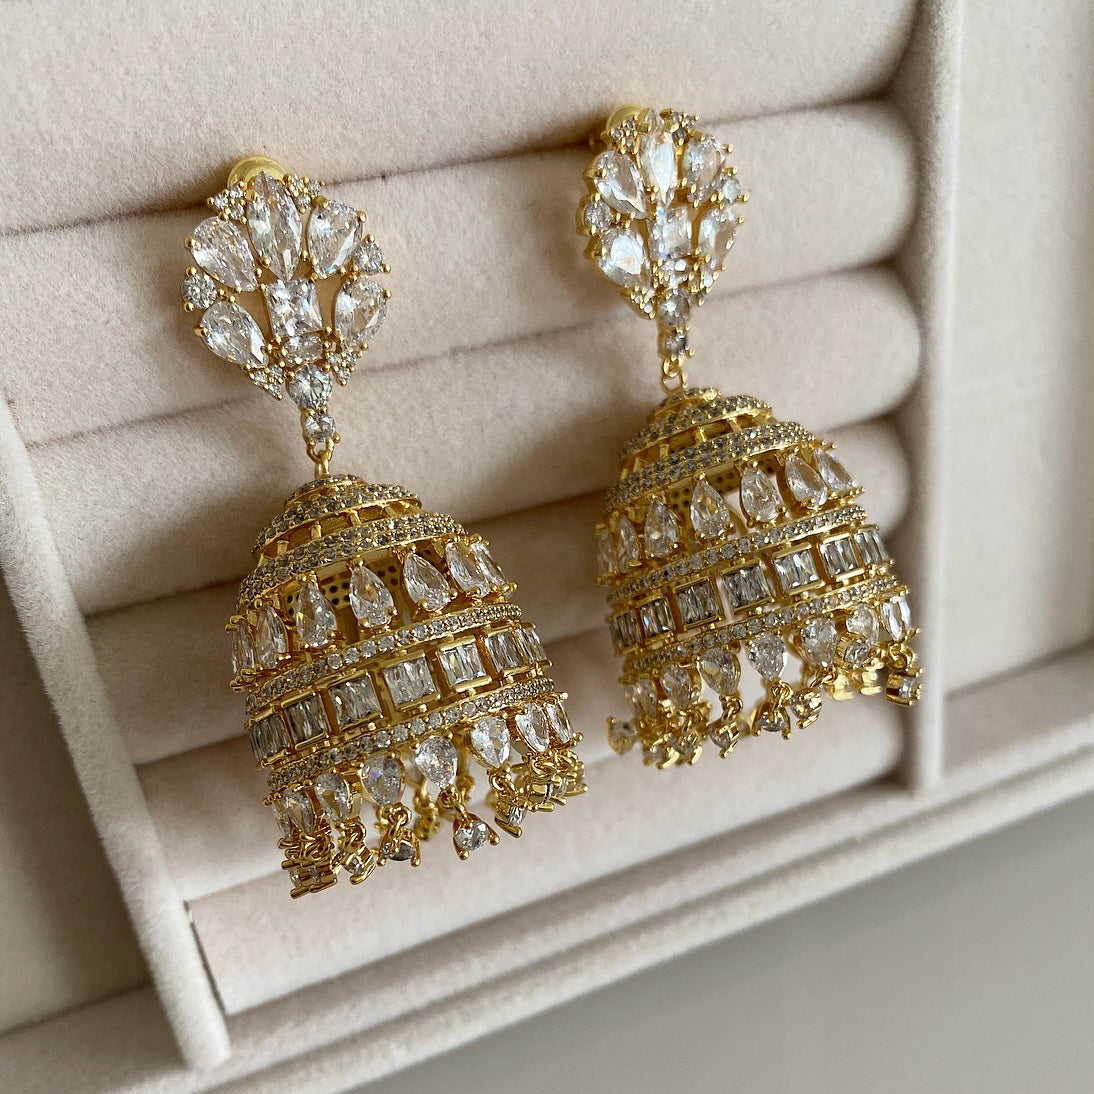 Haifa Crystal Jhumka is a unique combination of traditional and modern design. This jhumka is crafted with cz crystals, making it a luxurious, eye-catching statement piece. With a timeless design and quality construction, this beautiful piece is sure to bring a touch of elegance to any look. Earring drop 6x3cm